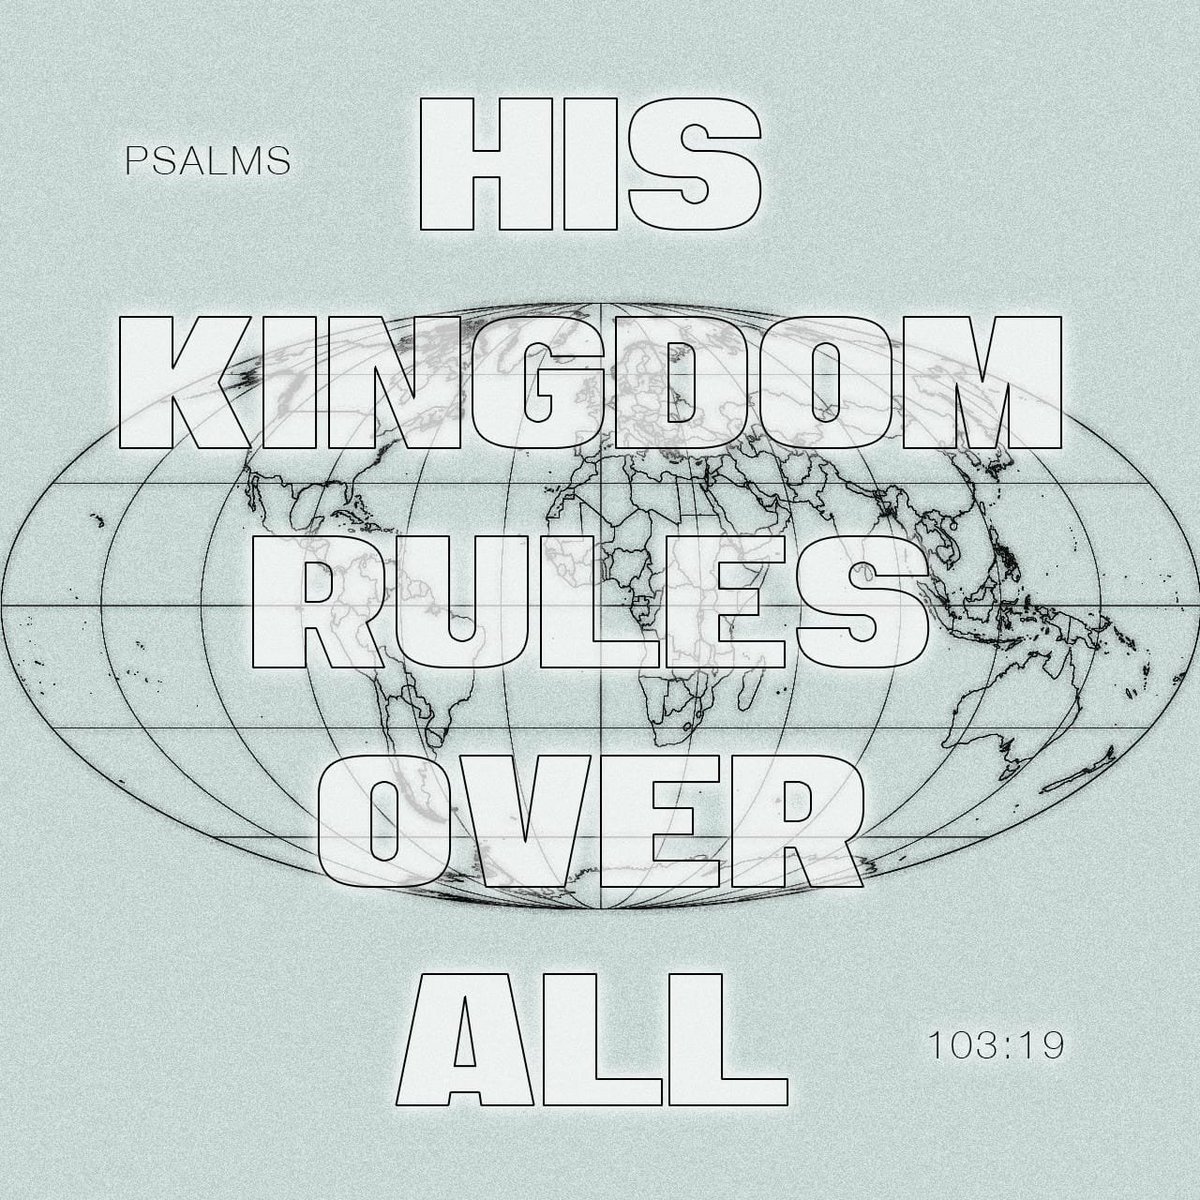 The Lord has established his throne in the heavens, and his kingdom rules over all.
Psalms 103:19
#ChristTheKing #RulesWithJustice #ThroneInHeaven #EarthlyRule #GodOfHeavenAndEarth